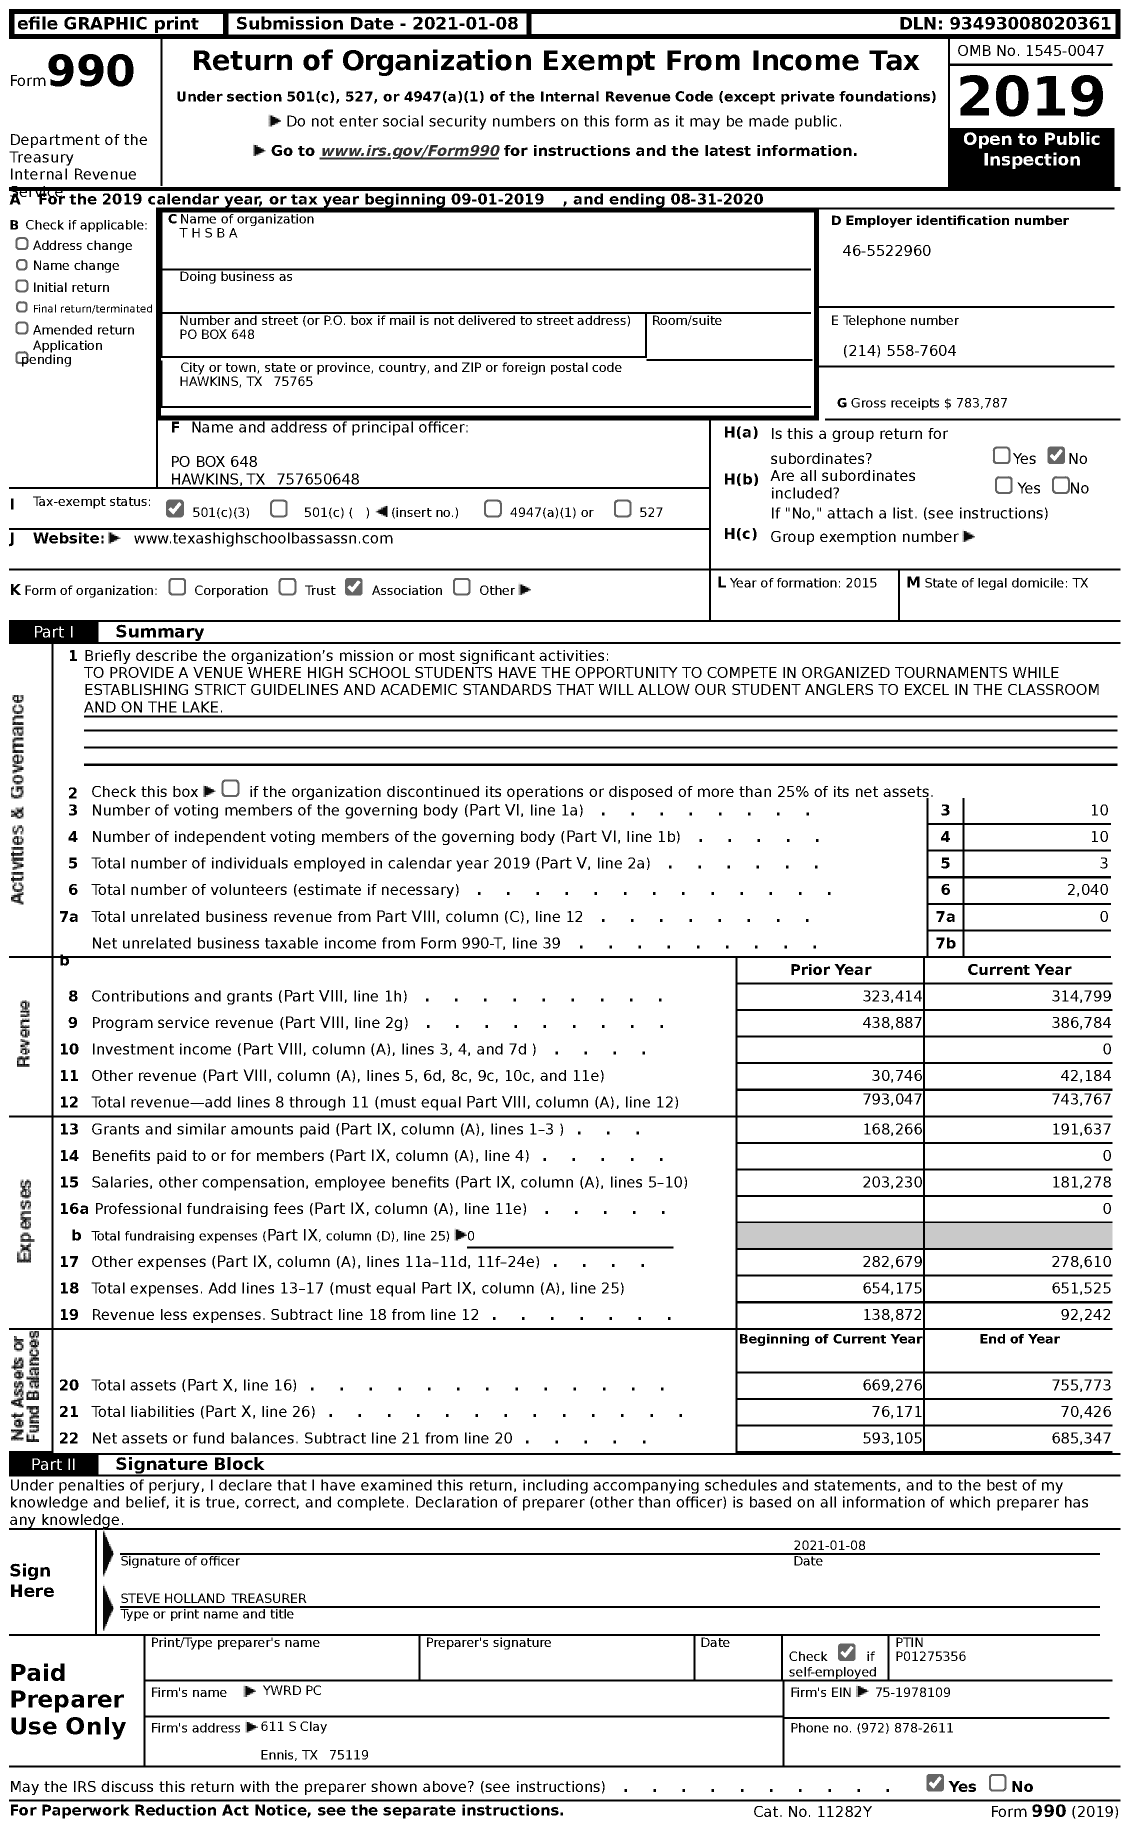 Image of first page of 2019 Form 990 for T H S B A (Thsba)